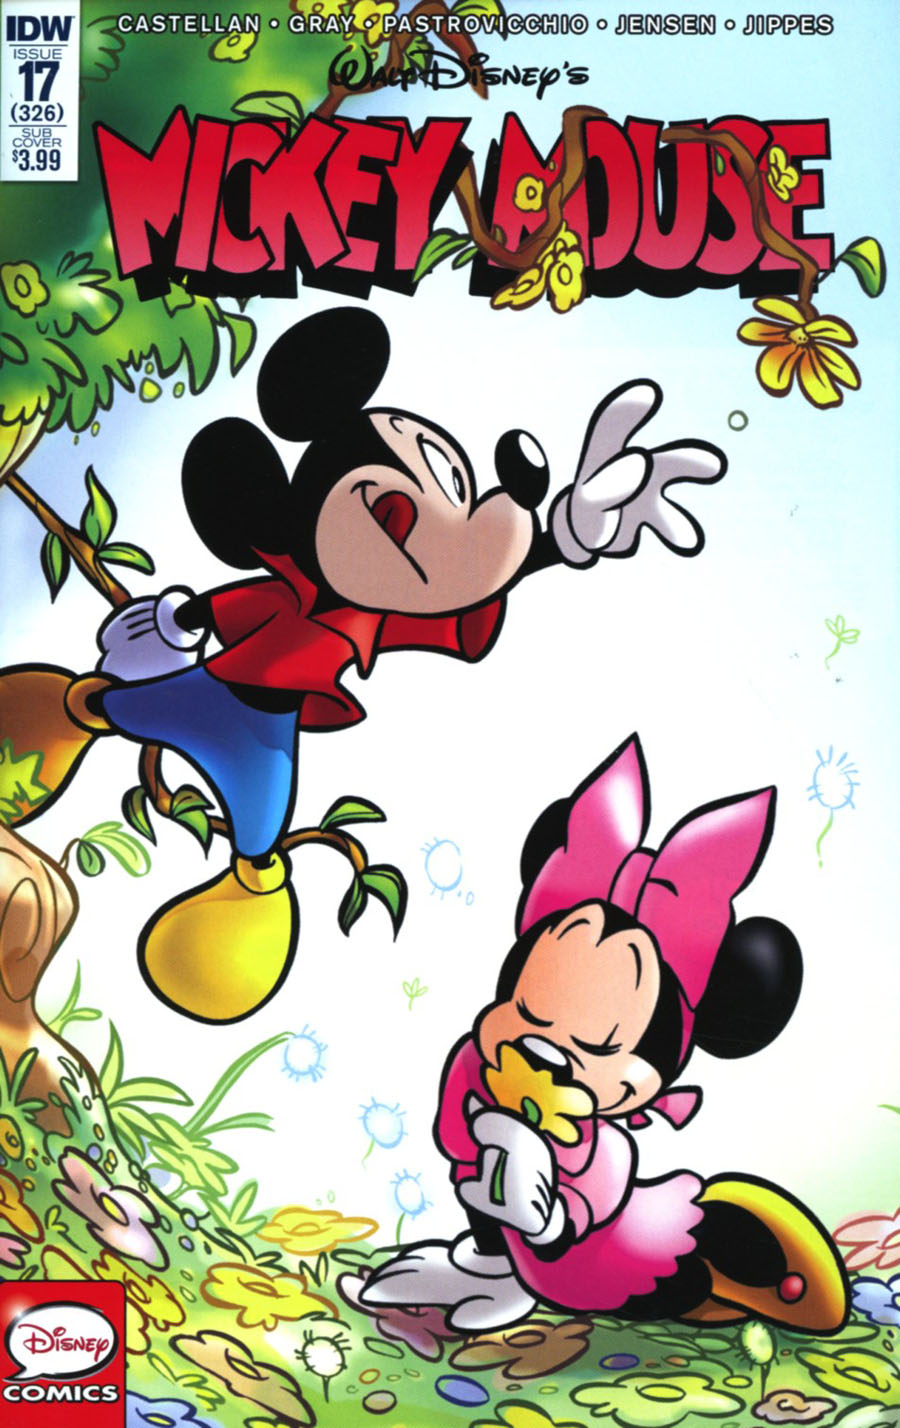 Mickey Mouse Vol 2 #17 Cover B Variant Massimilliano Narcisco Subscription Cover